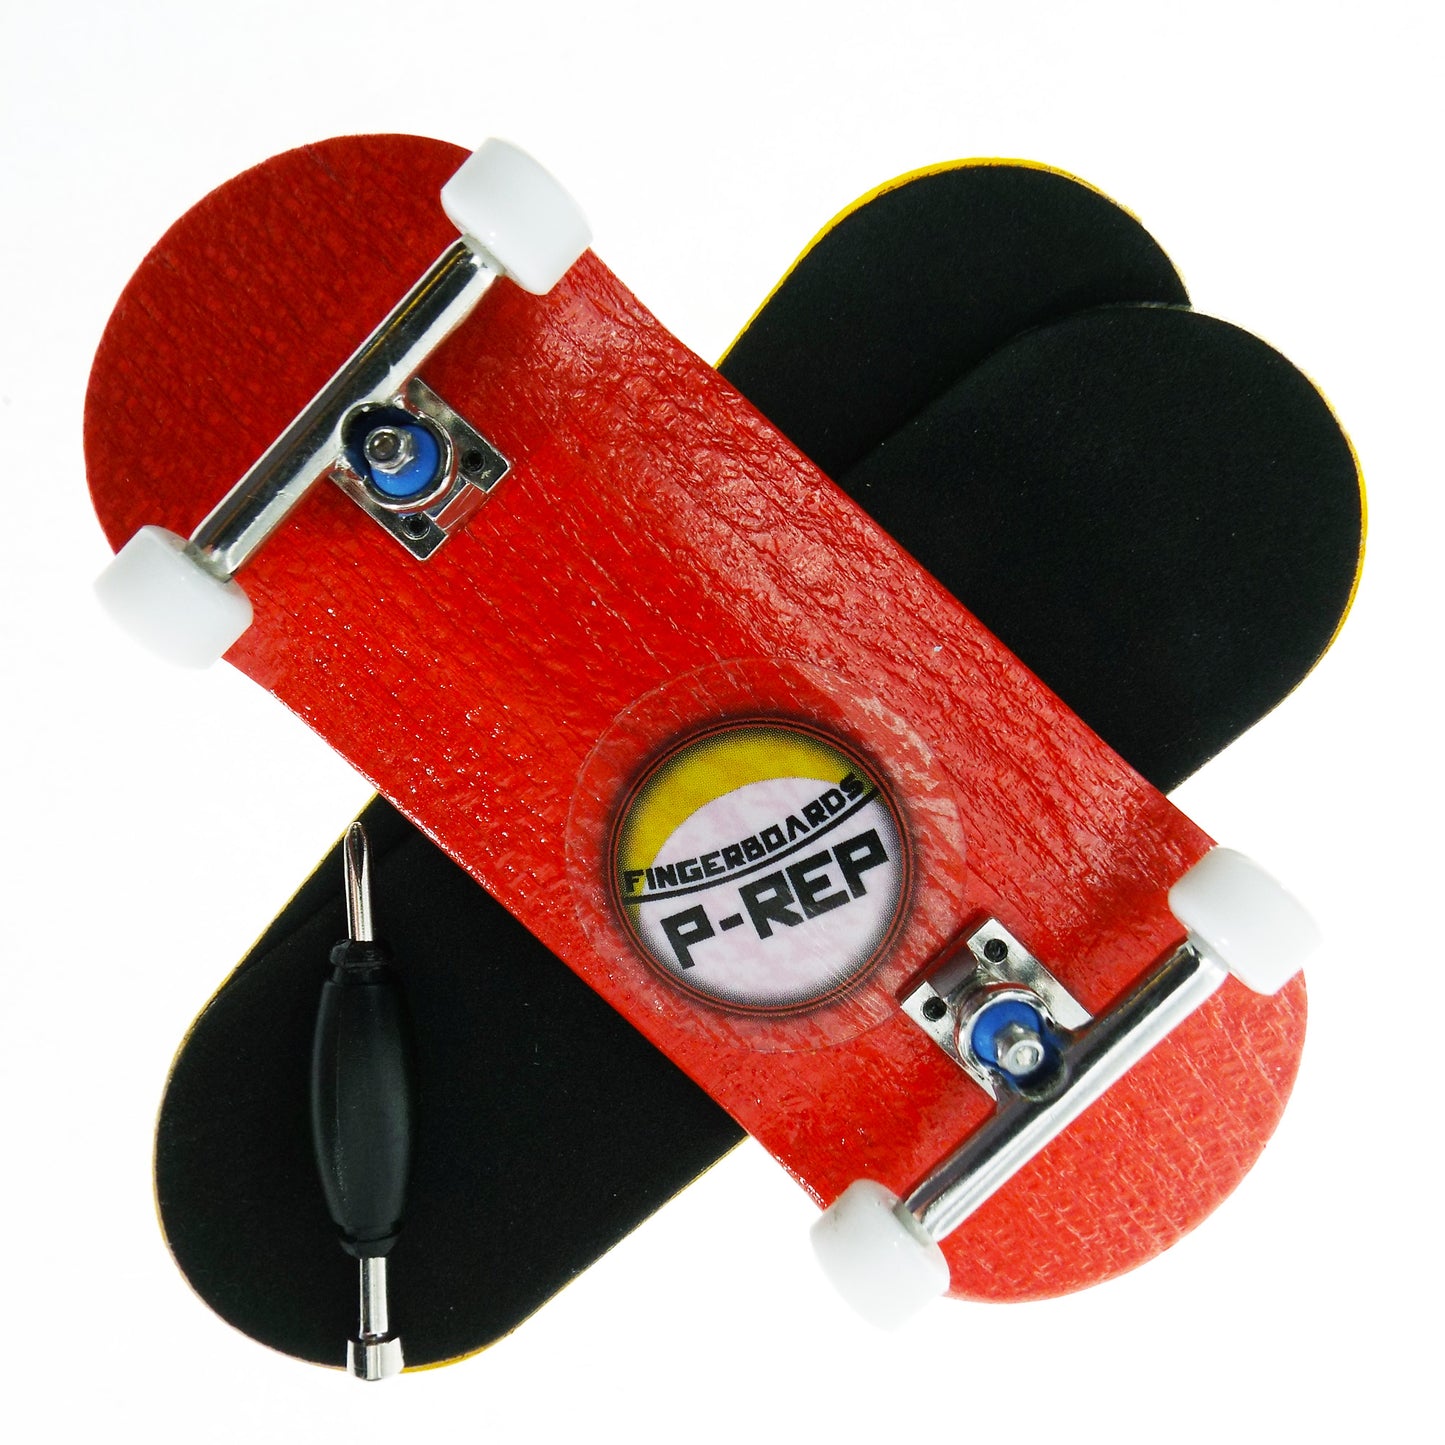 P-REP  34mm x 97mm V2 Pro Performance Complete - Red